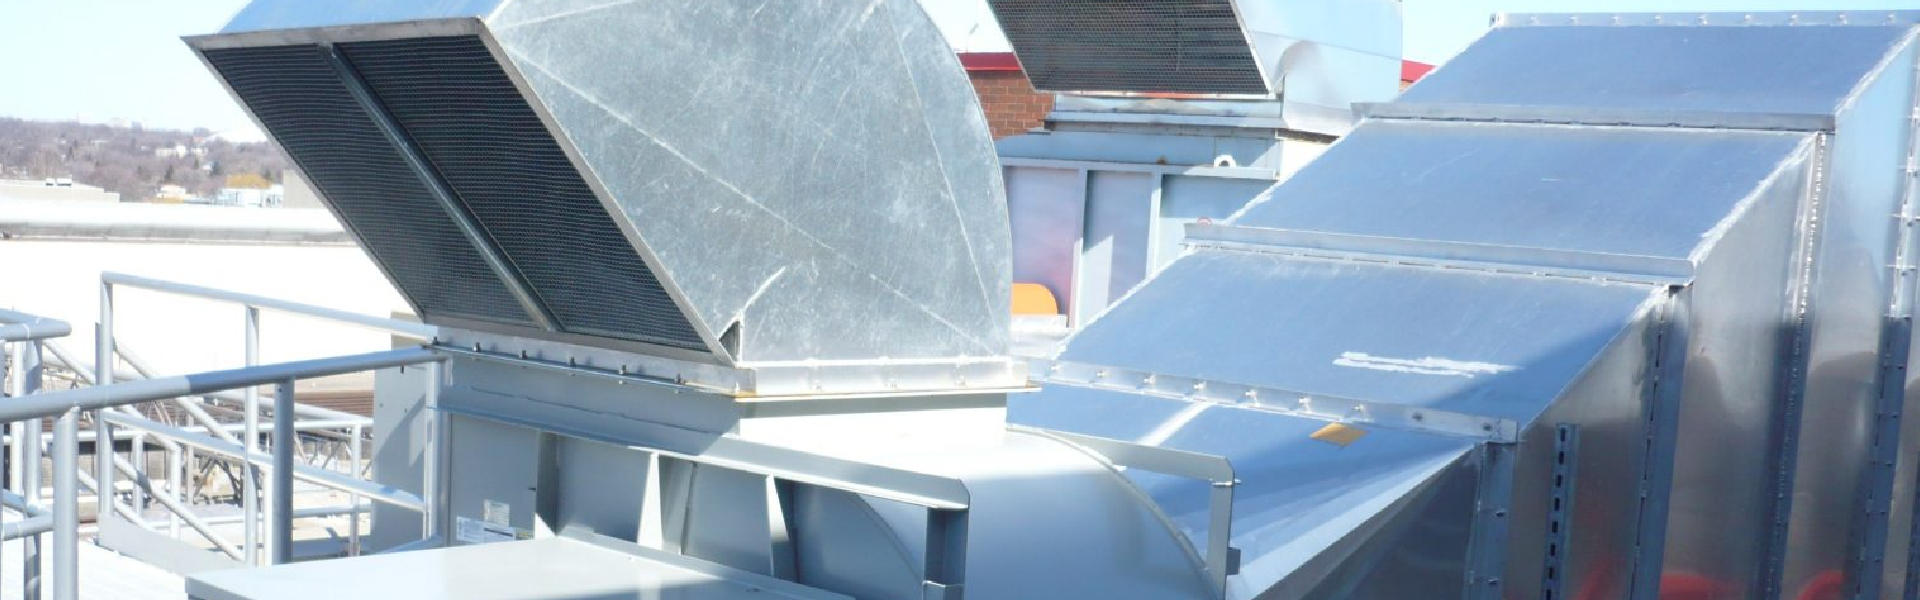 Overview of Commercial Ventilation Systems